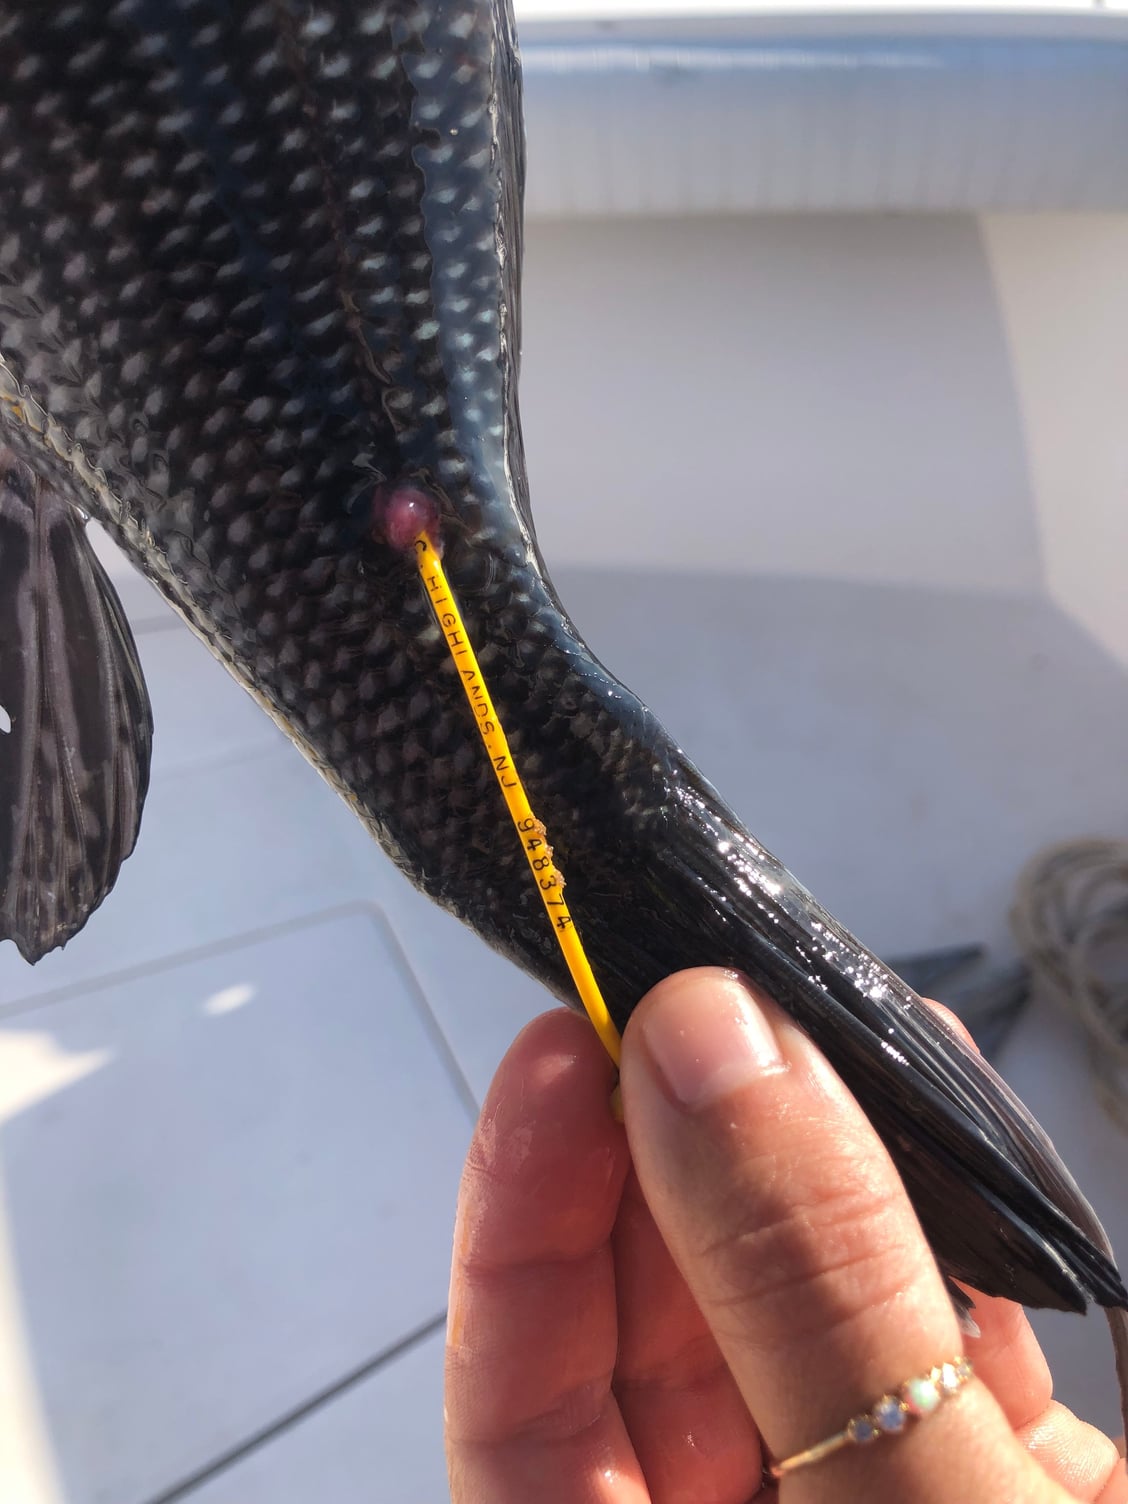 Sea robin strips for fluke-How to - The Hull Truth - Boating and